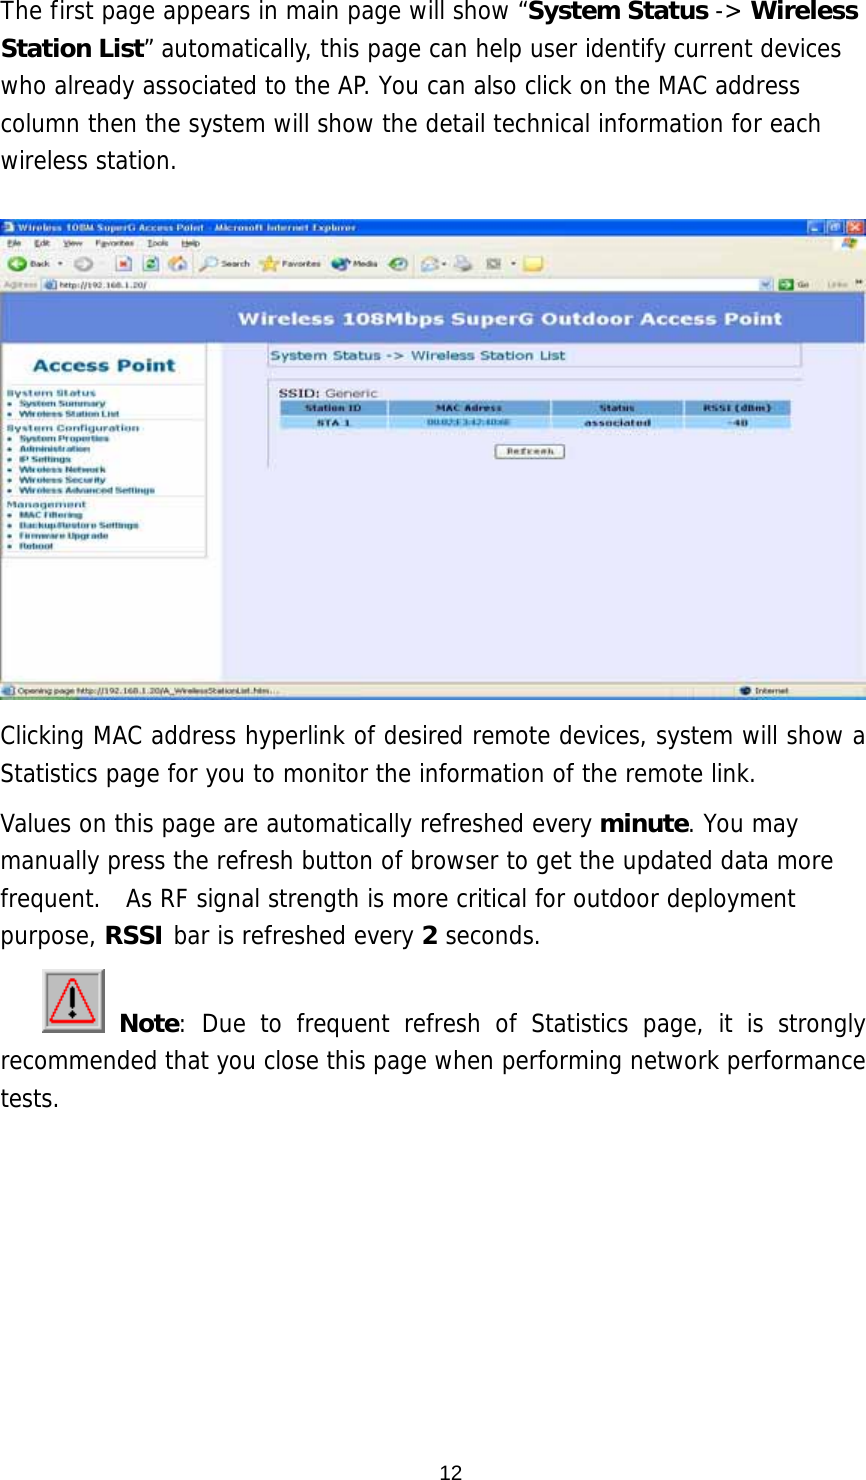  12The first page appears in main page will show “System Status -&gt; Wireless Station List” automatically, this page can help user identify current devices who already associated to the AP. You can also click on the MAC address column then the system will show the detail technical information for each wireless station.    Clicking MAC address hyperlink of desired remote devices, system will show a Statistics page for you to monitor the information of the remote link. Values on this page are automatically refreshed every minute. You may manually press the refresh button of browser to get the updated data more frequent.  As RF signal strength is more critical for outdoor deployment purpose, RSSI bar is refreshed every 2 seconds.  Note: Due to frequent refresh of Statistics page, it is strongly recommended that you close this page when performing network performance tests.       